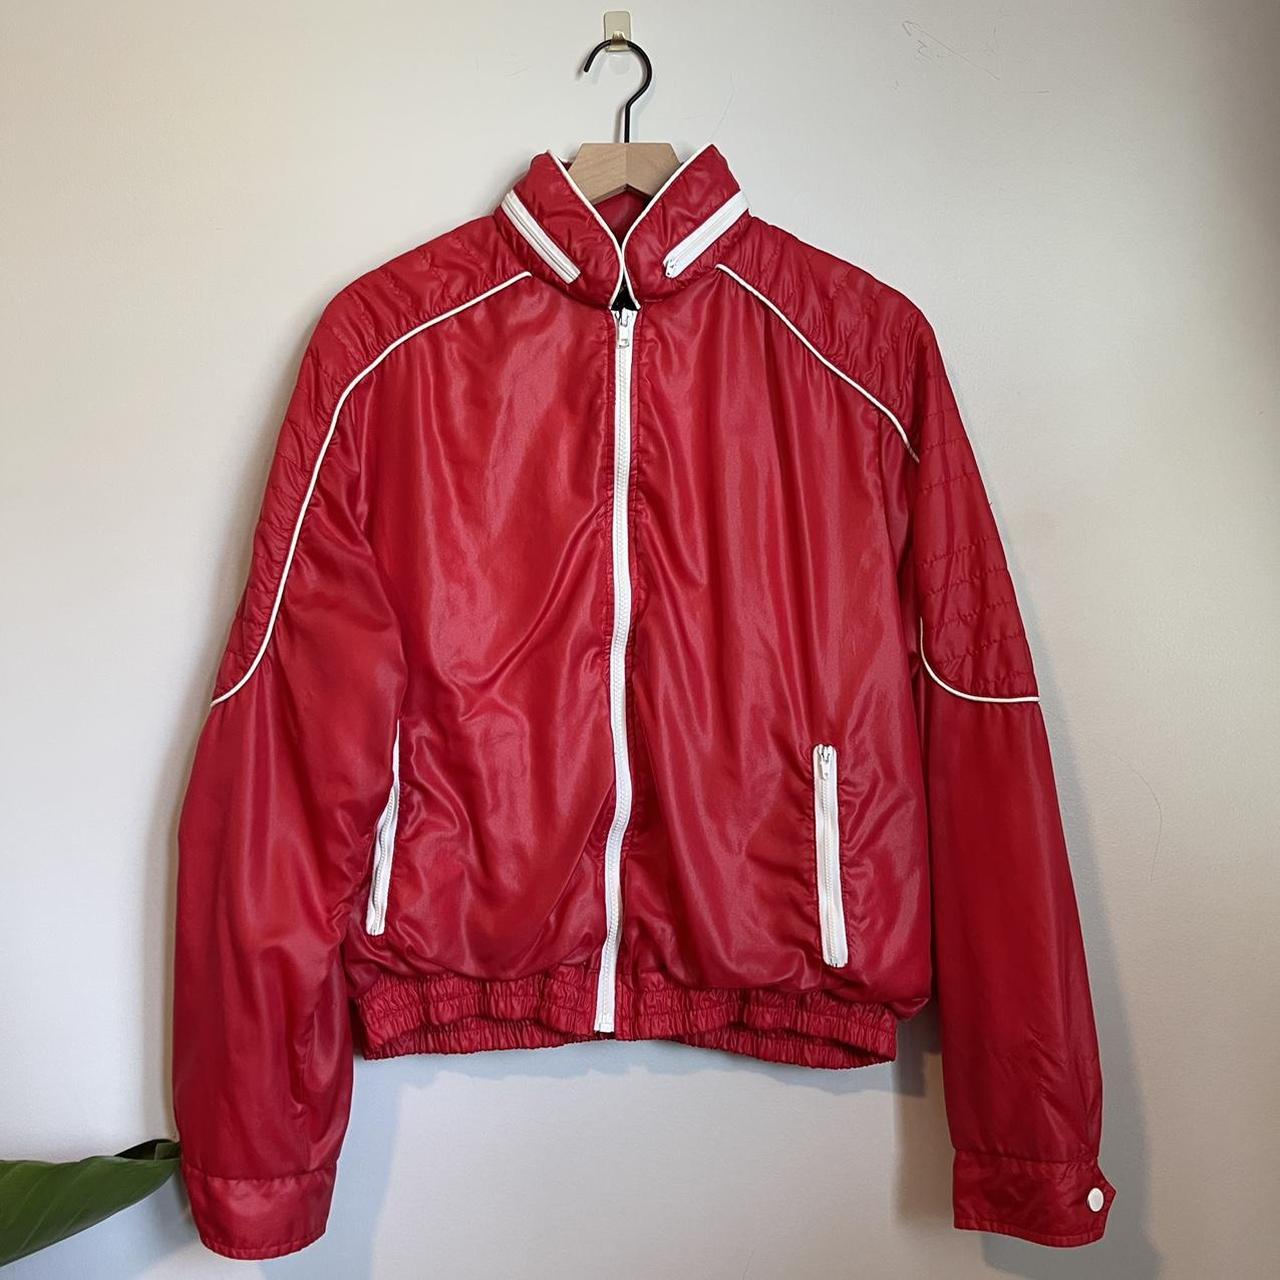 60s-70s vintage nylon windbreaker. Bright red with...